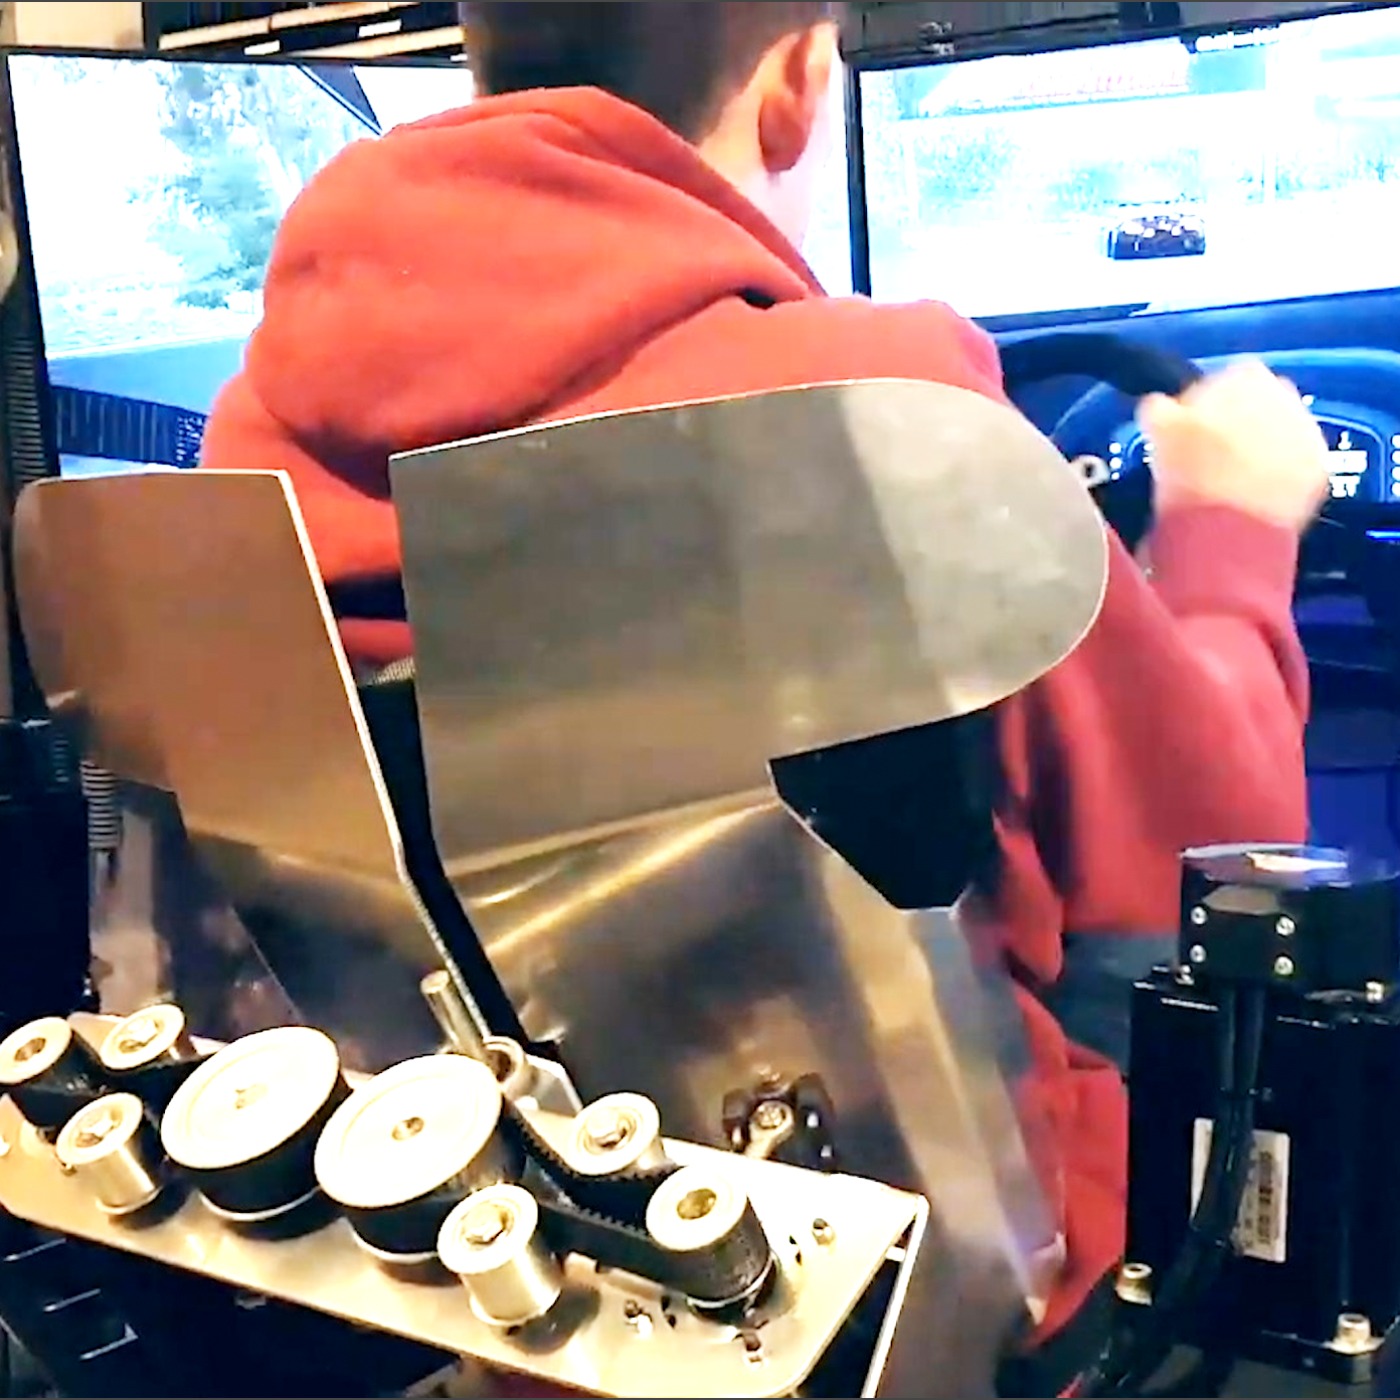 Moment: He Built His Own G Force Sim Racing Rig